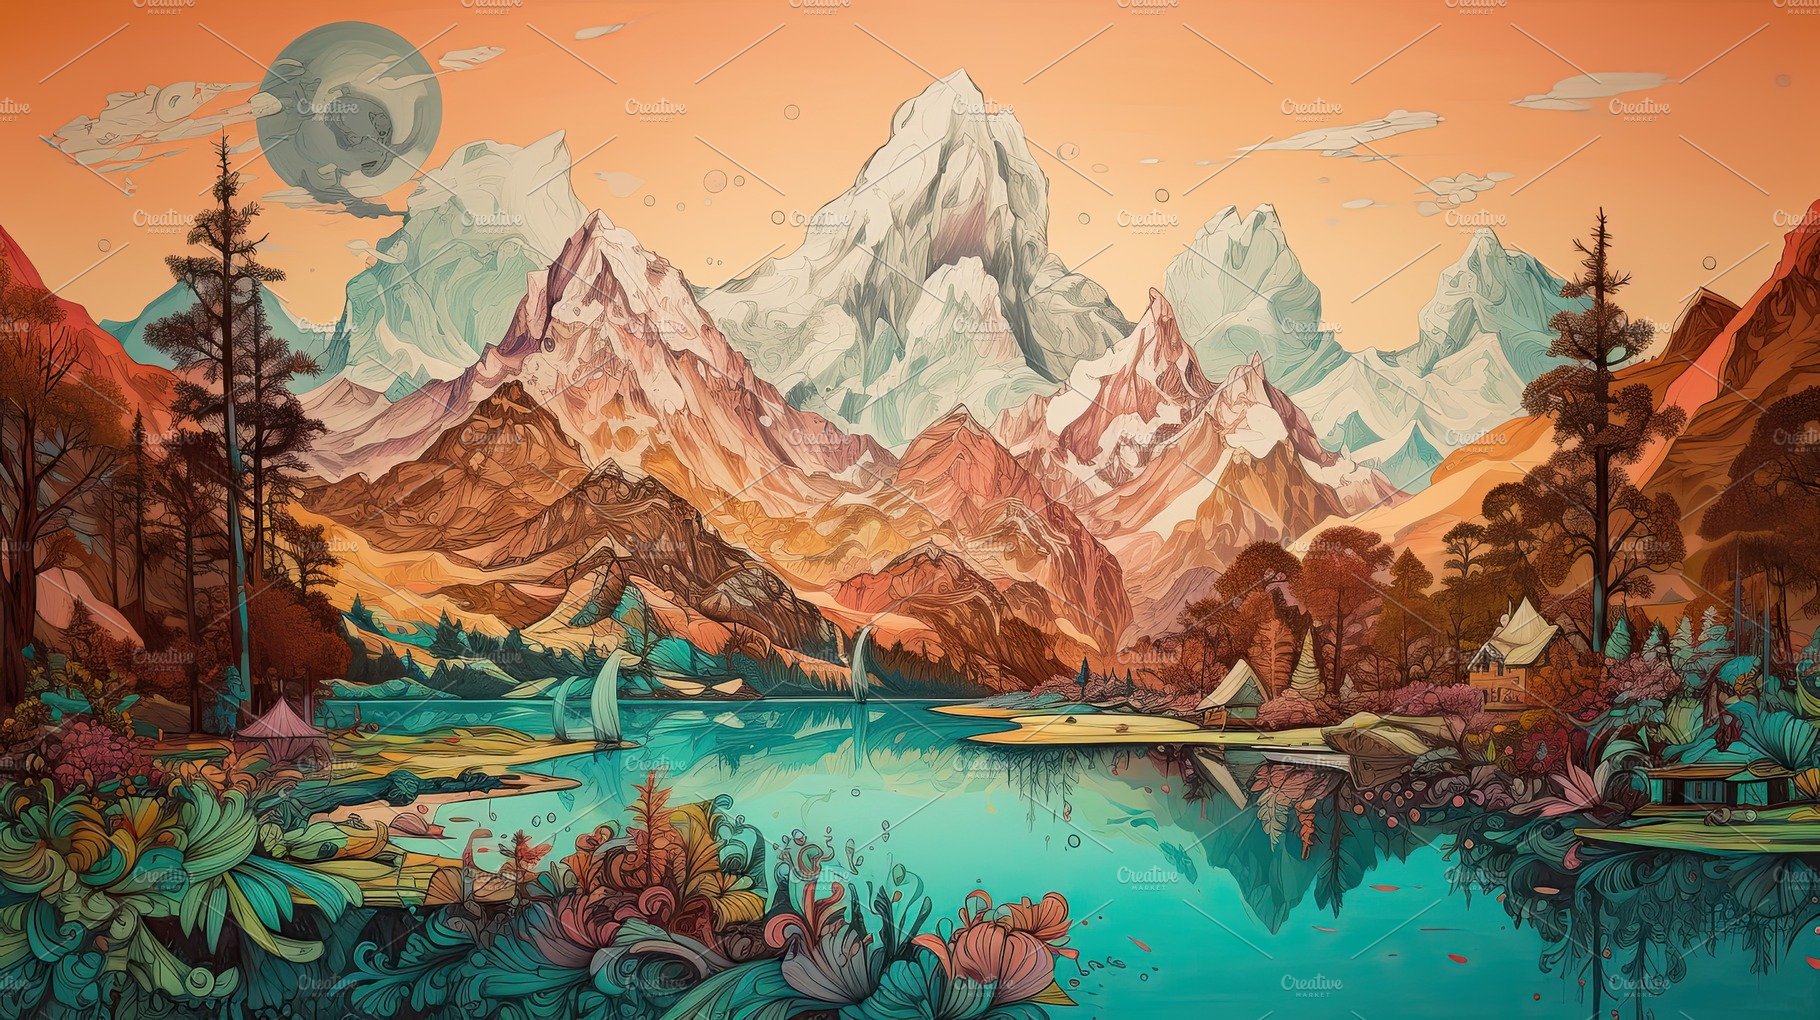 Colored illustration of a natural landscape mountains and a lake cover image.